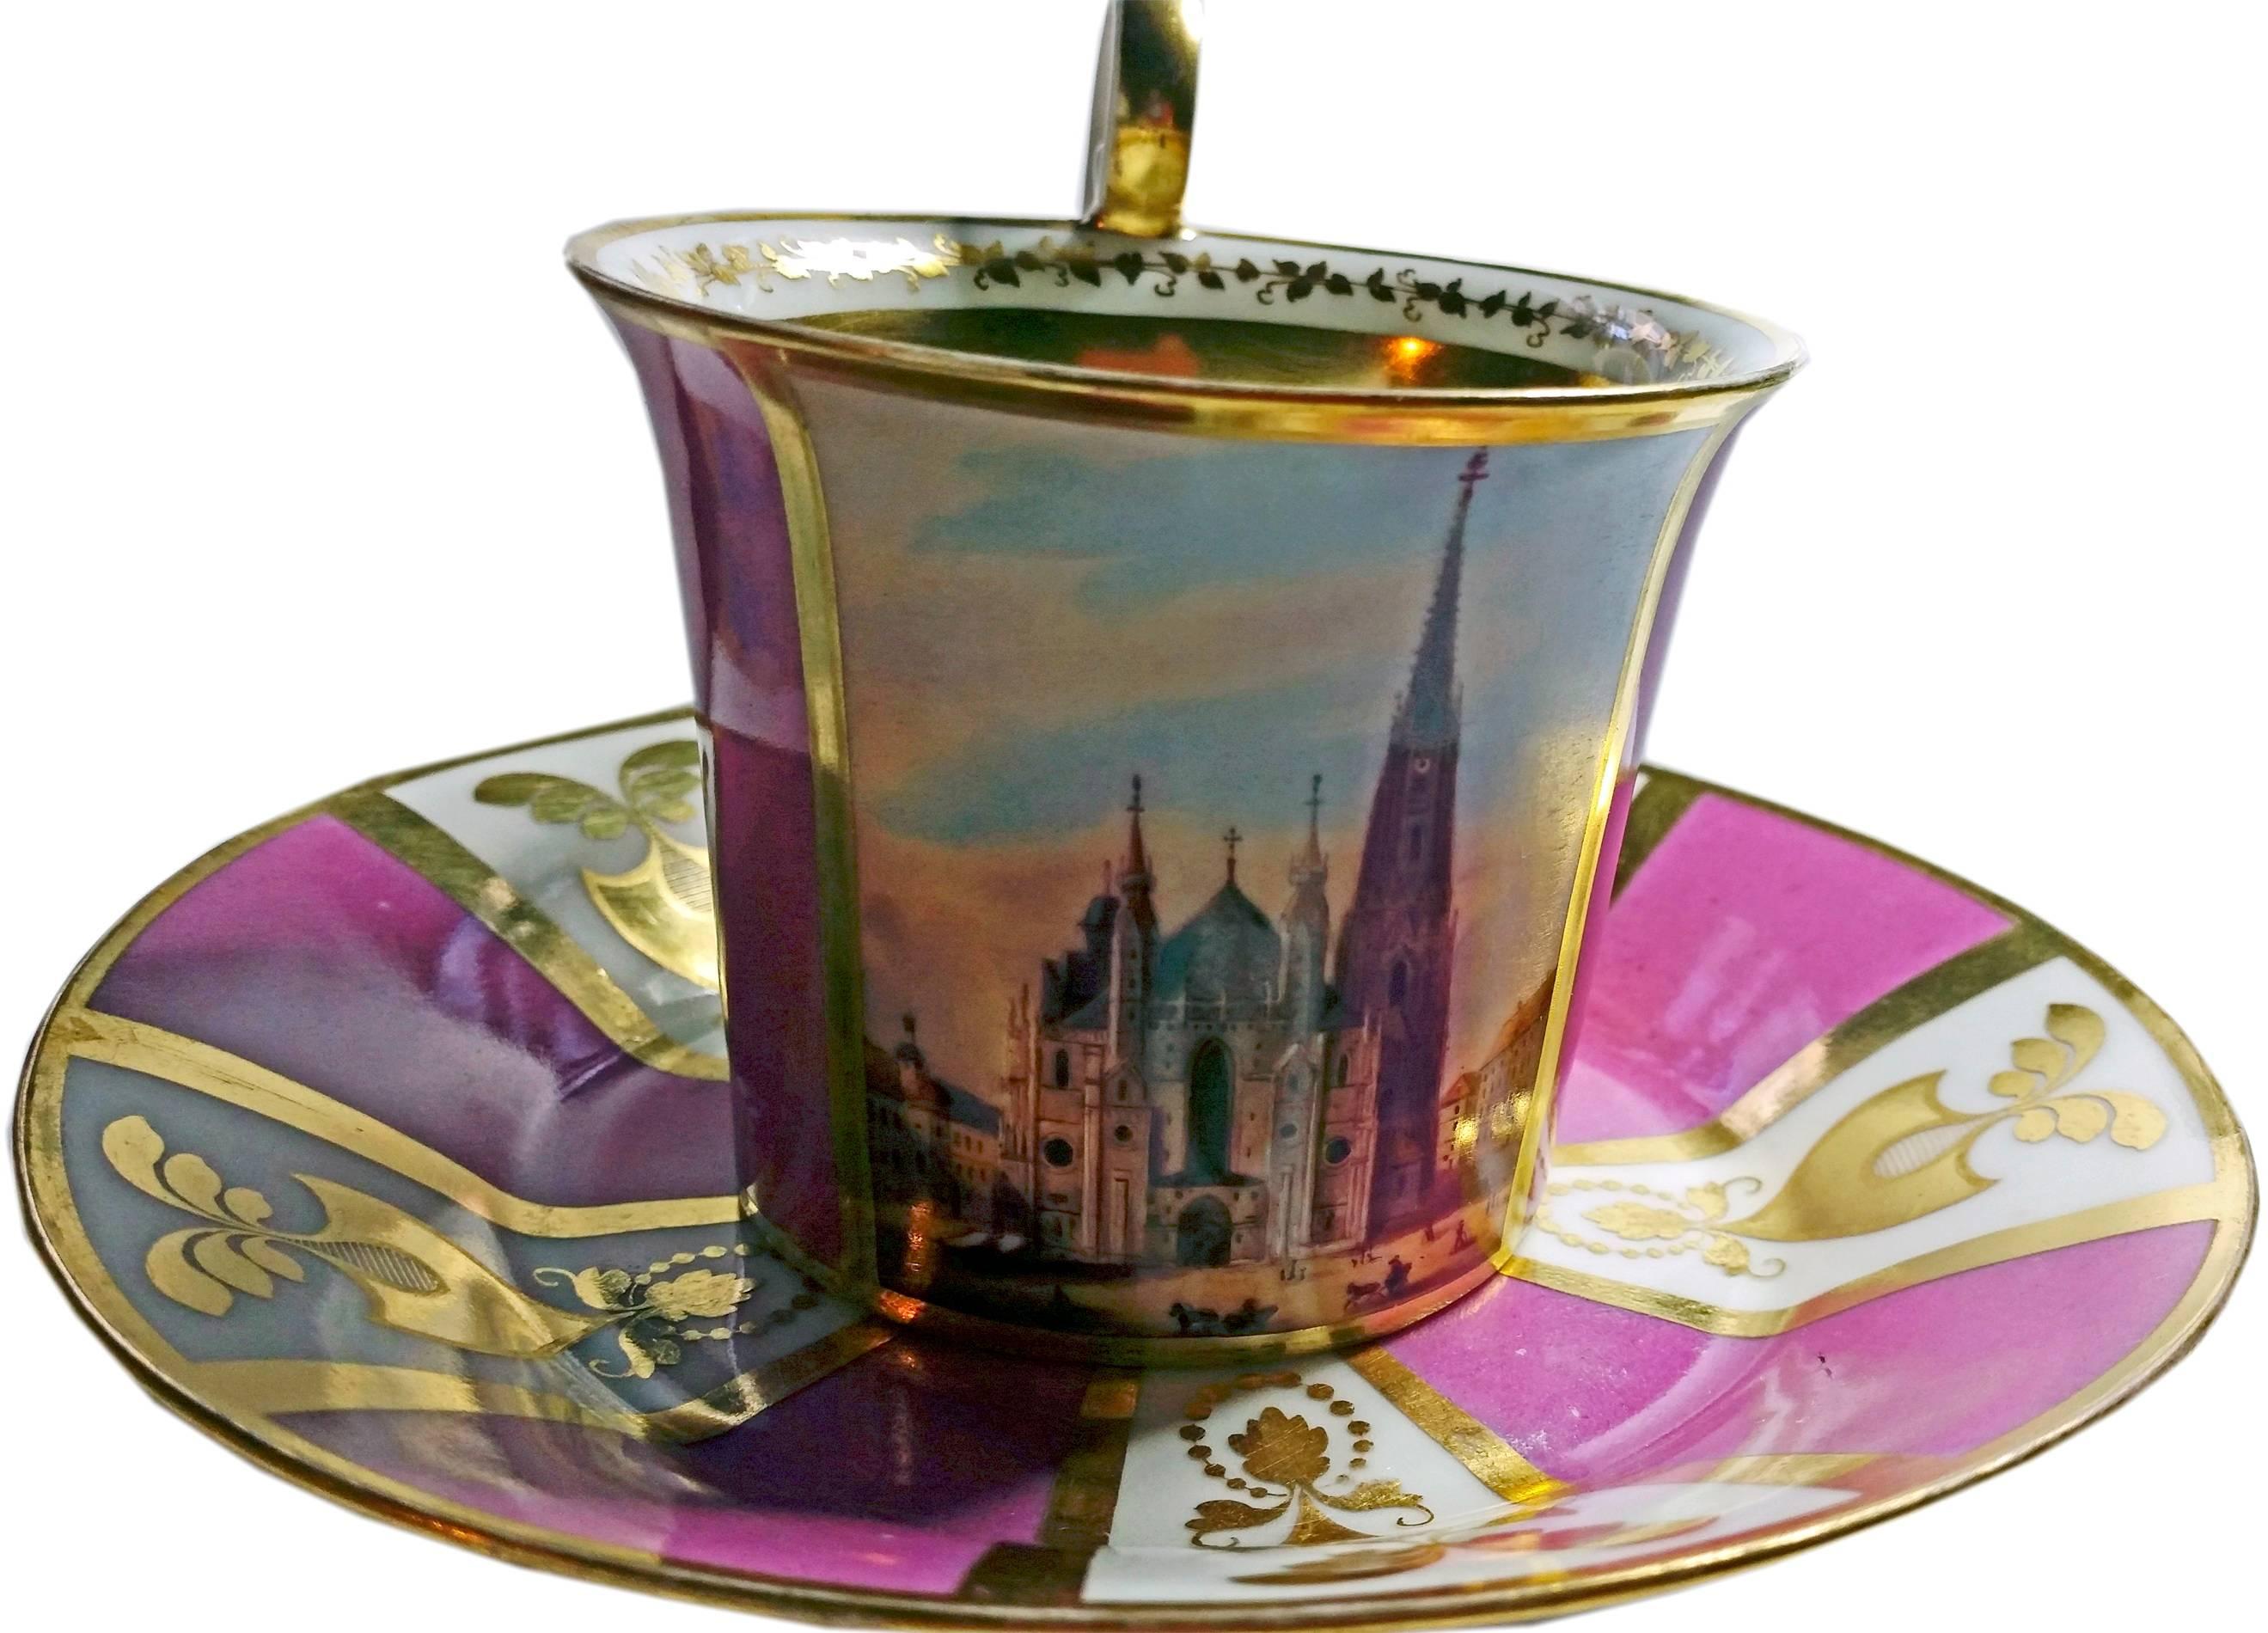 Cup with hoisted handle and saucer with view of Saint Stephen's Cathedral / Vienna.

Vienna / Old Imperial Austrian Porcelain Manufactory
(Alt Wien / Kaiserliche Porzellan Manufaktur)
dated 1821

Hallmarked:
PAINTER's NUMBER 14 
(= JOHANN